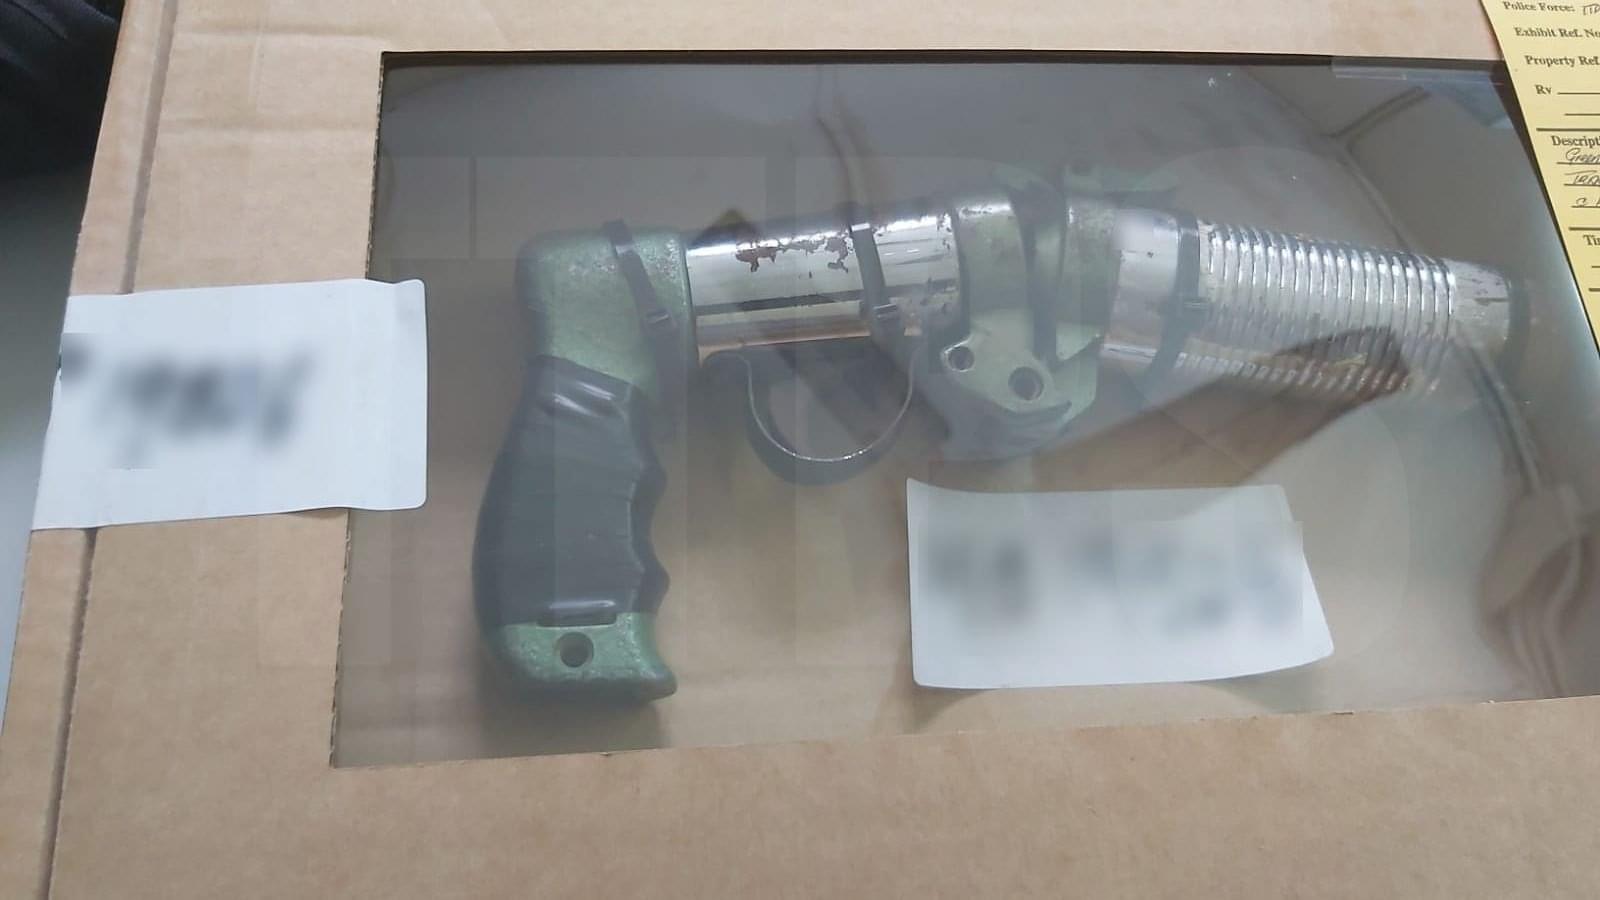 Two firearms found during police anti-crime exercise